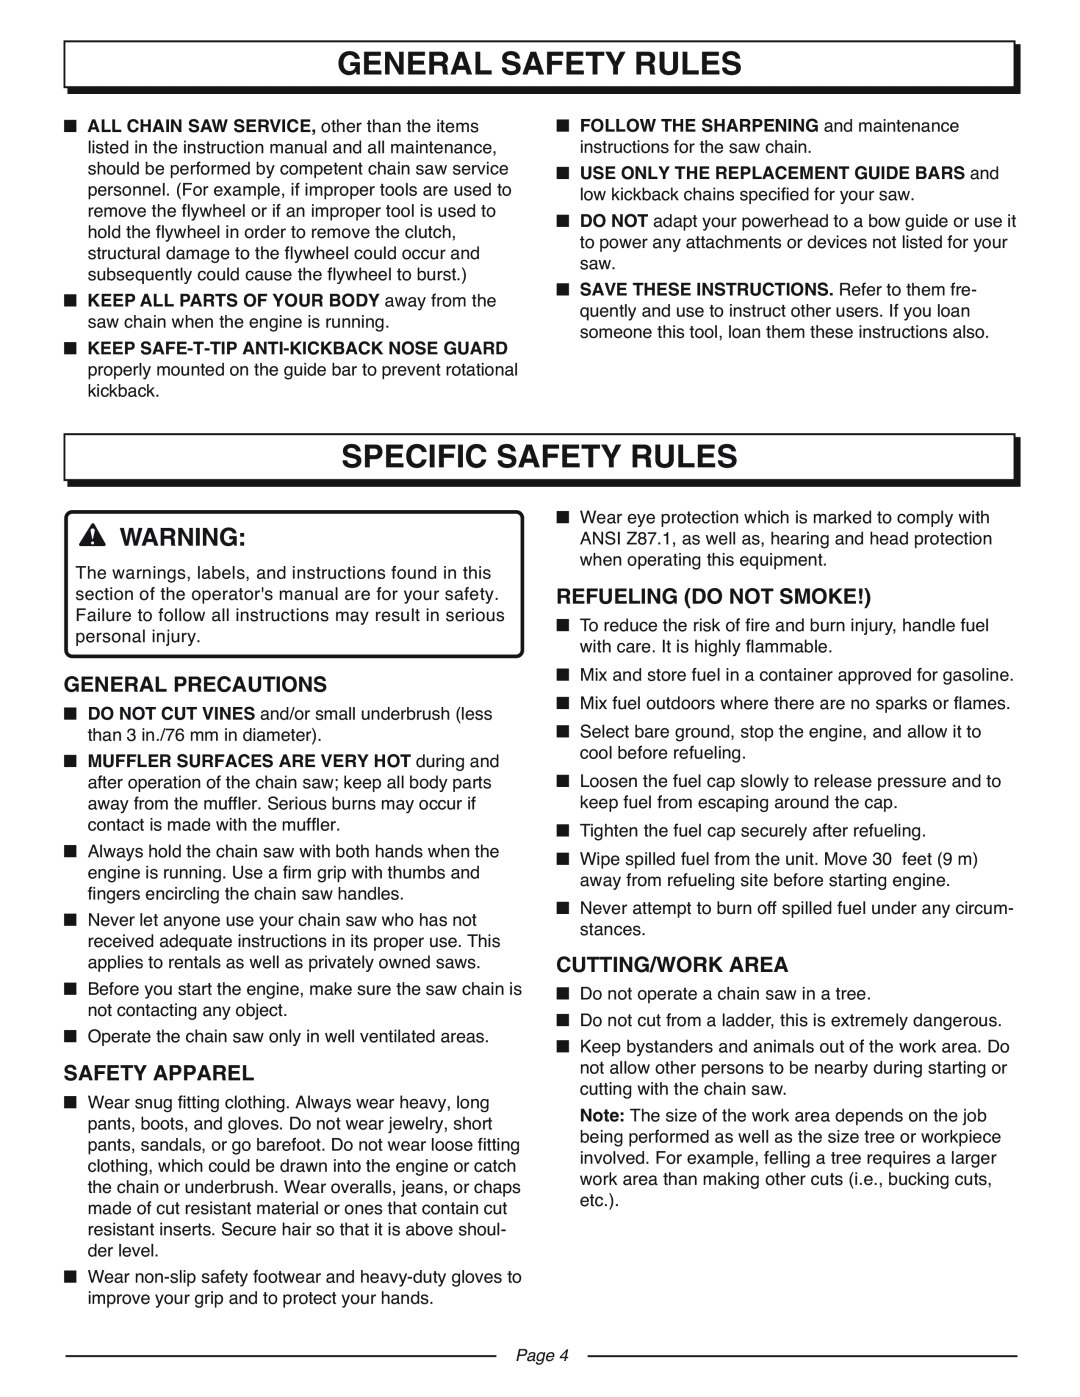 Homelite UT10927A Specific Safety Rules, General Precautions, Safety Apparel, Refueling Do Not Smoke, Cutting/Work Area 